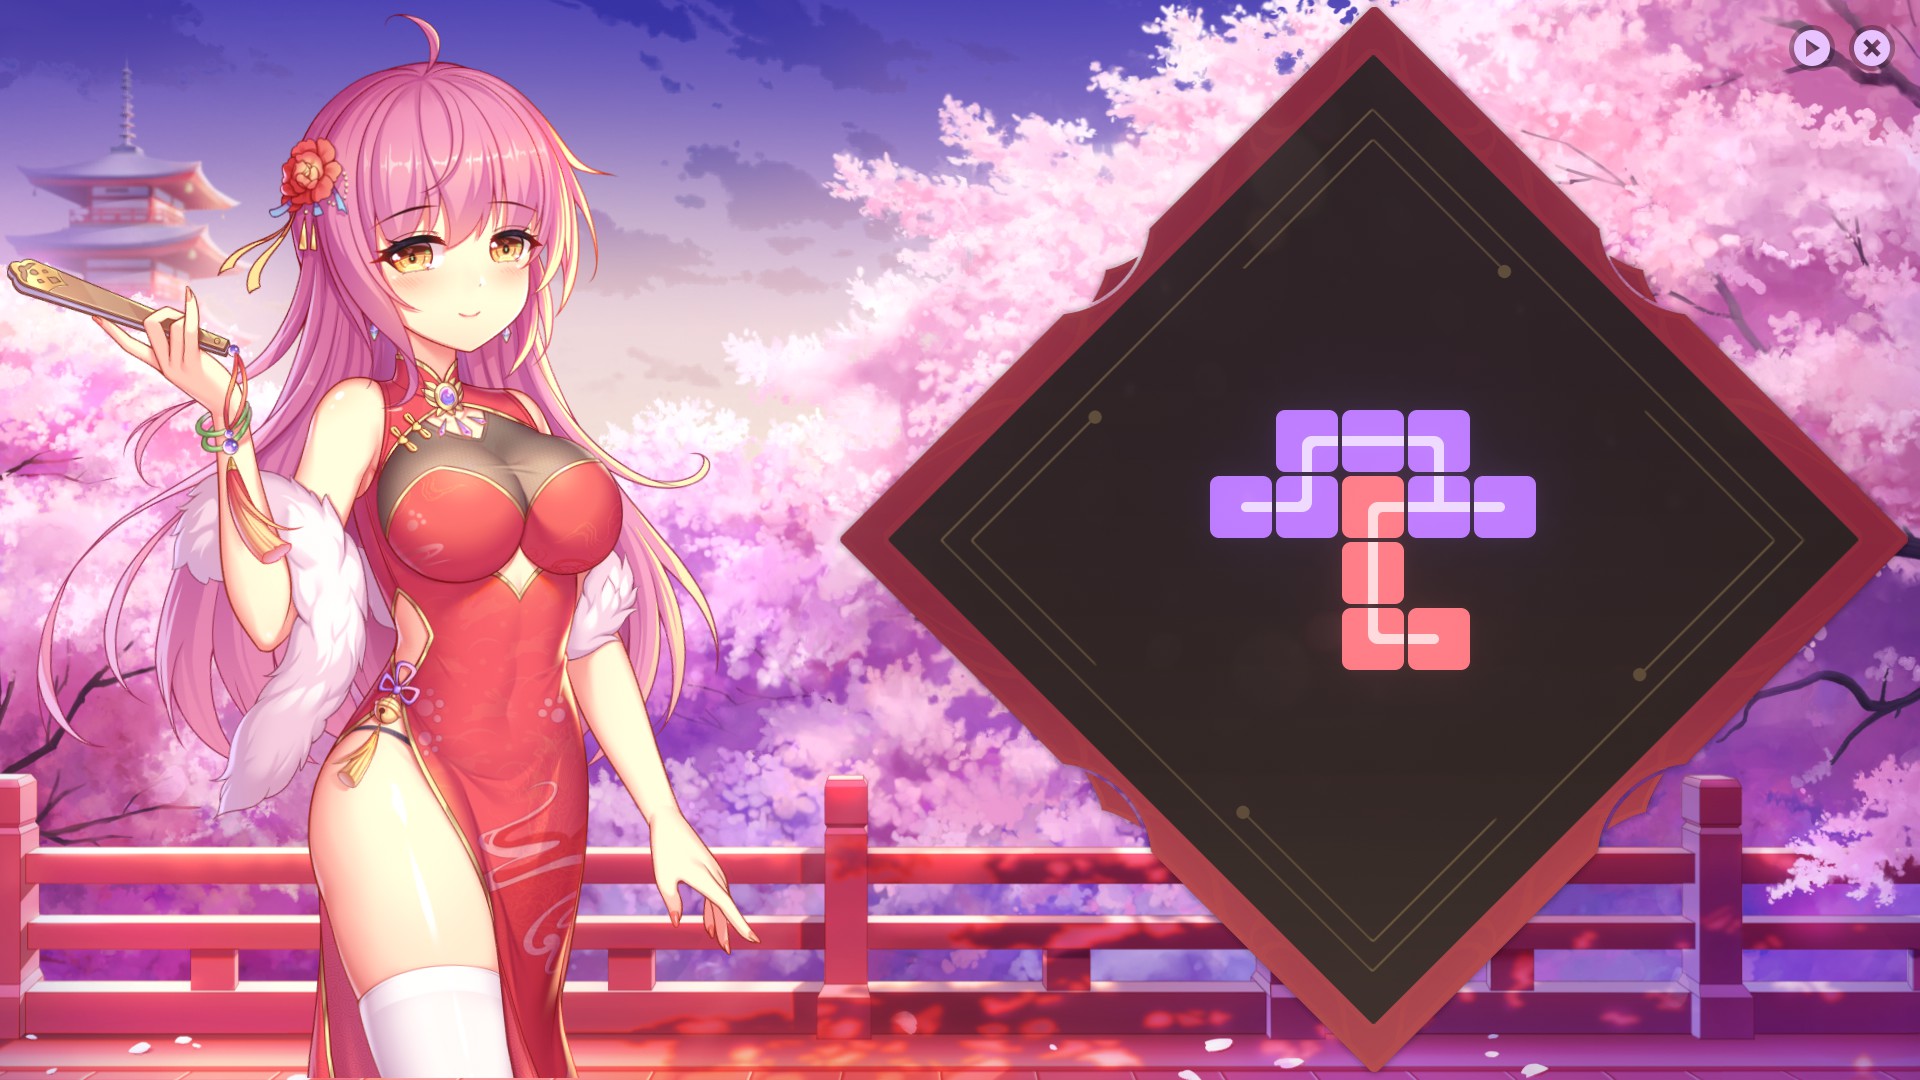 Sakura Hime 2 - Complete Achievement Guide +Walkthrough - Images of completed levels - 62DF0D4